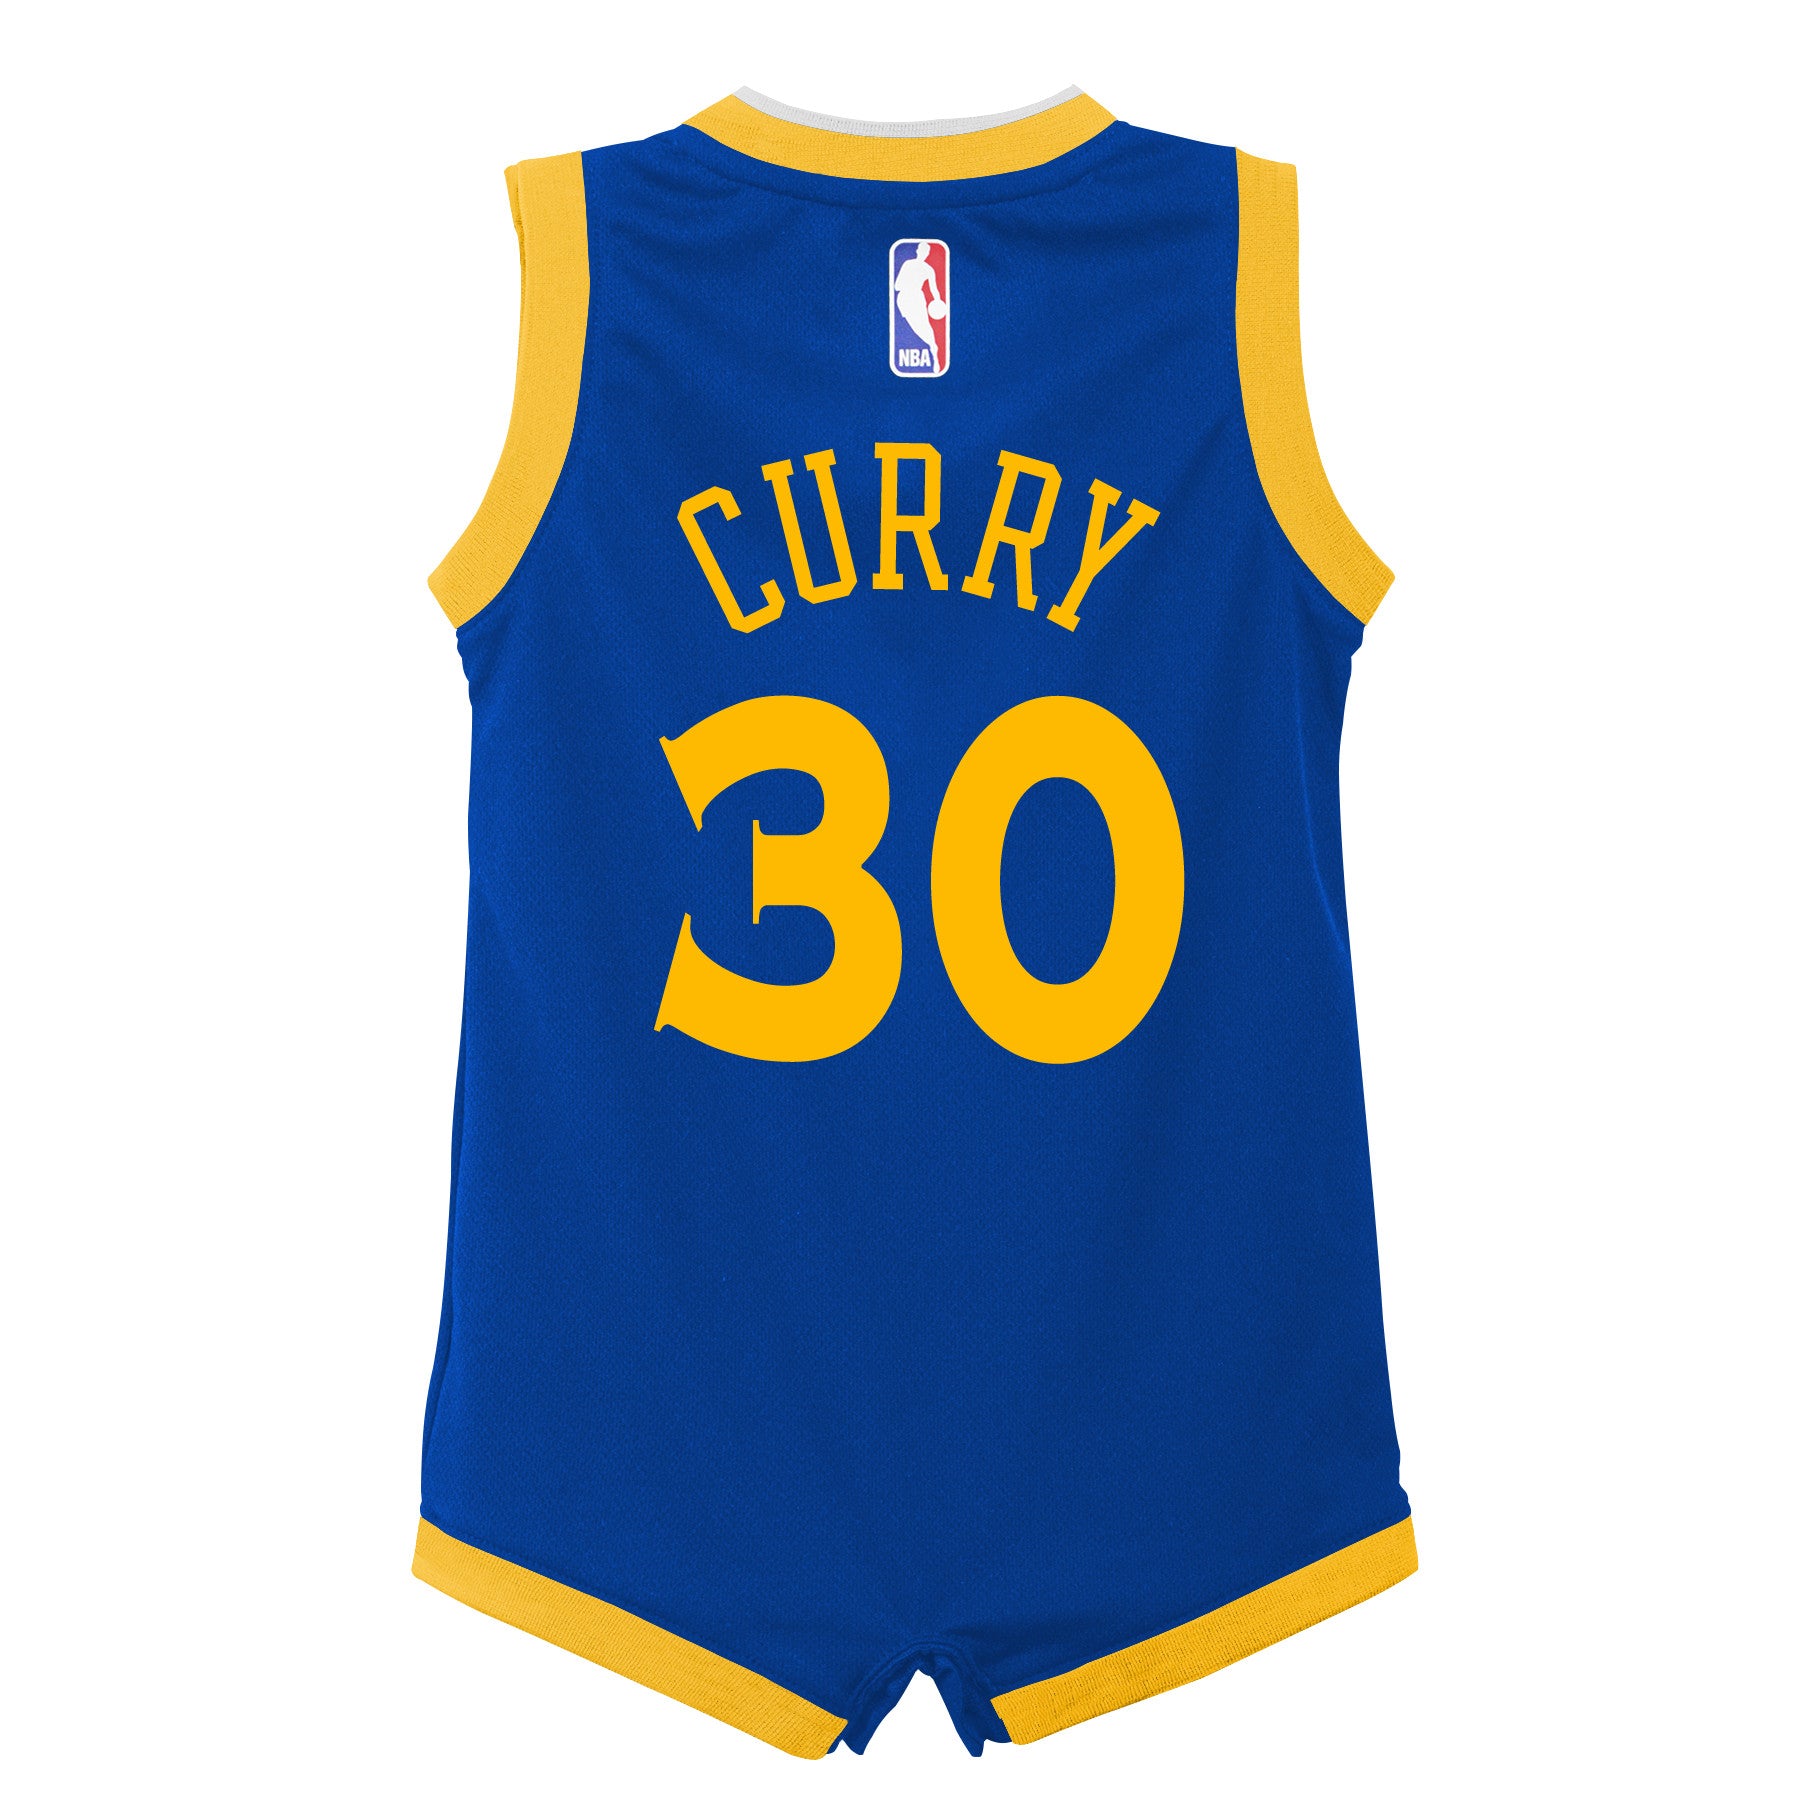 kevin durant baby jersey